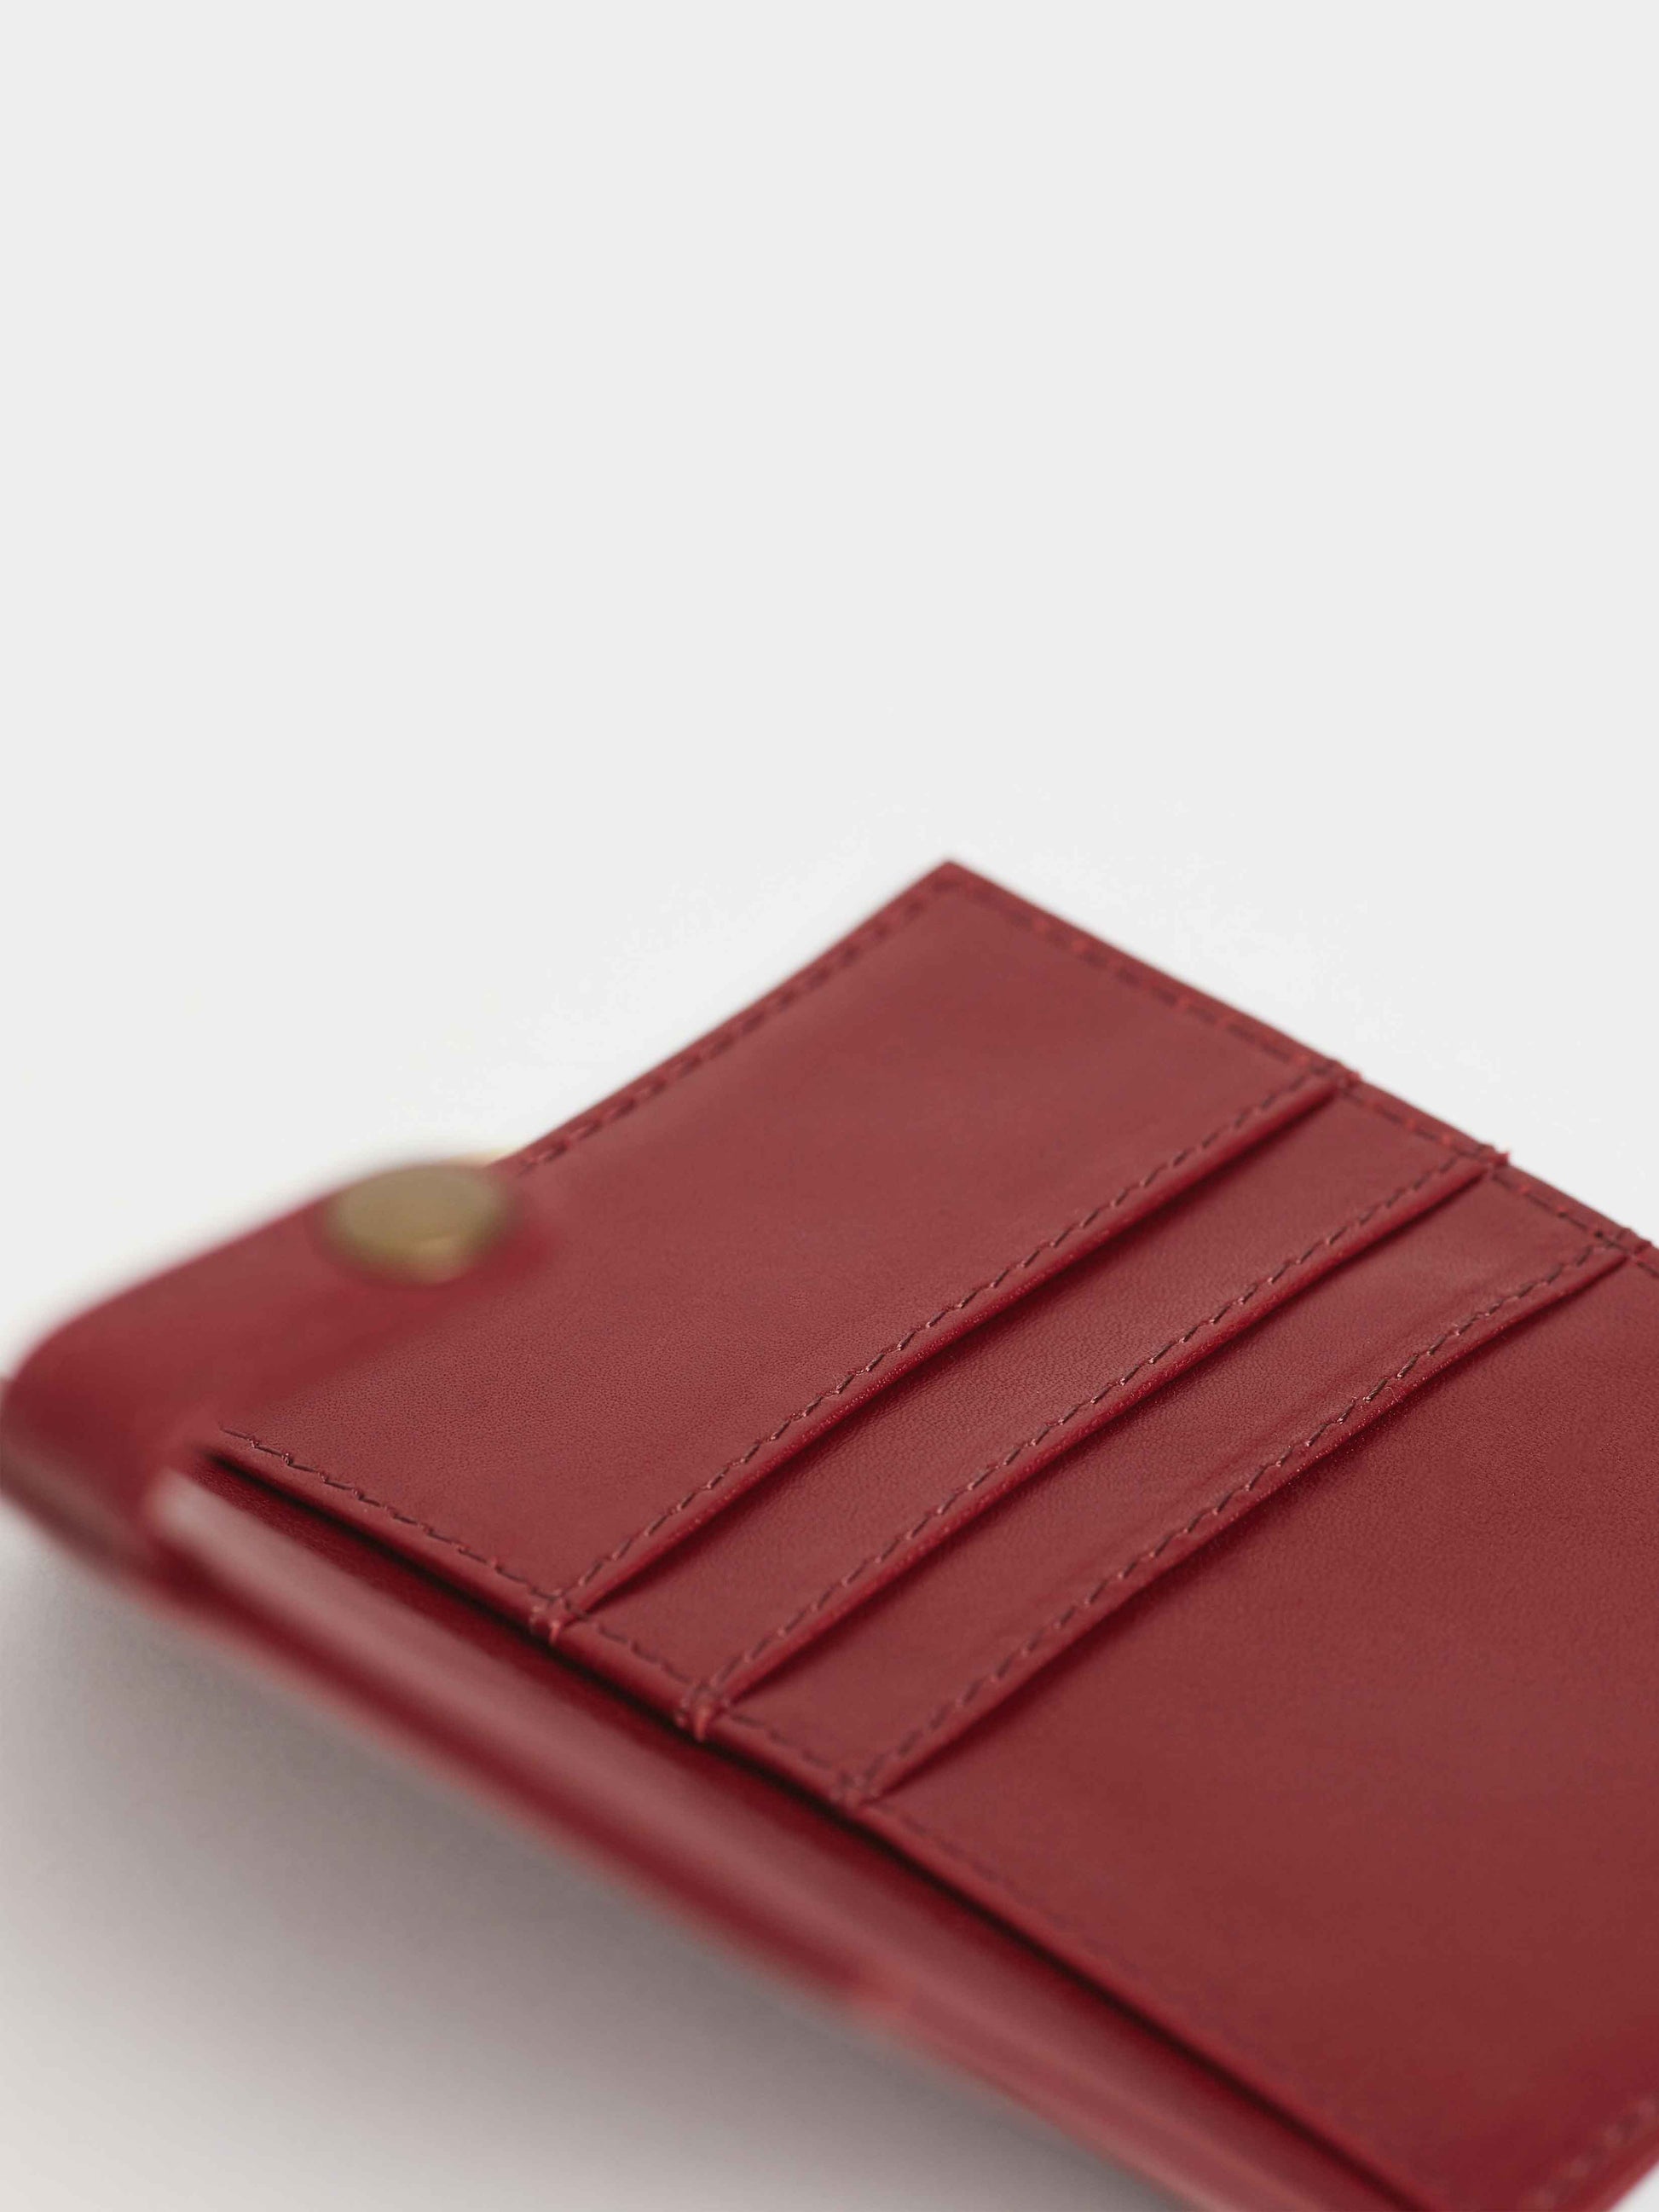 Cabernet Red Leather Travel wallet -Passport wallets by payton james- leather bags nashville